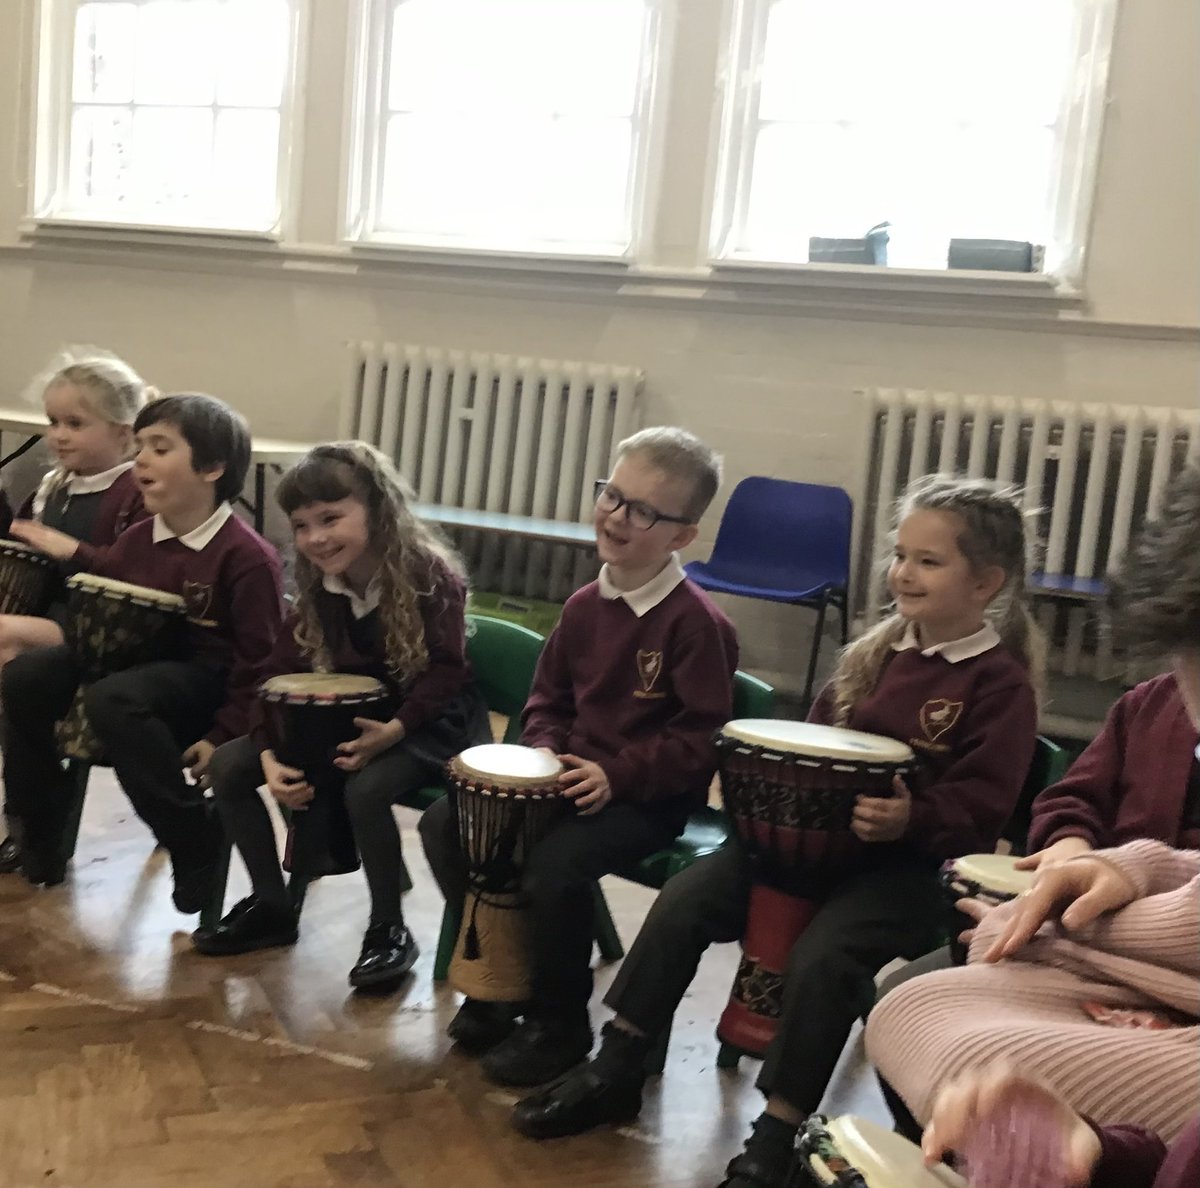 🎶 Thank you Kieron for leading the school in a wonderful afternoon of singing and djembe drumming at Ferncumbe. What a wonderful display of the children’s talent and enthusiasm for music making, from Reception through to Year 6! 🎶 @wark_shiremusic